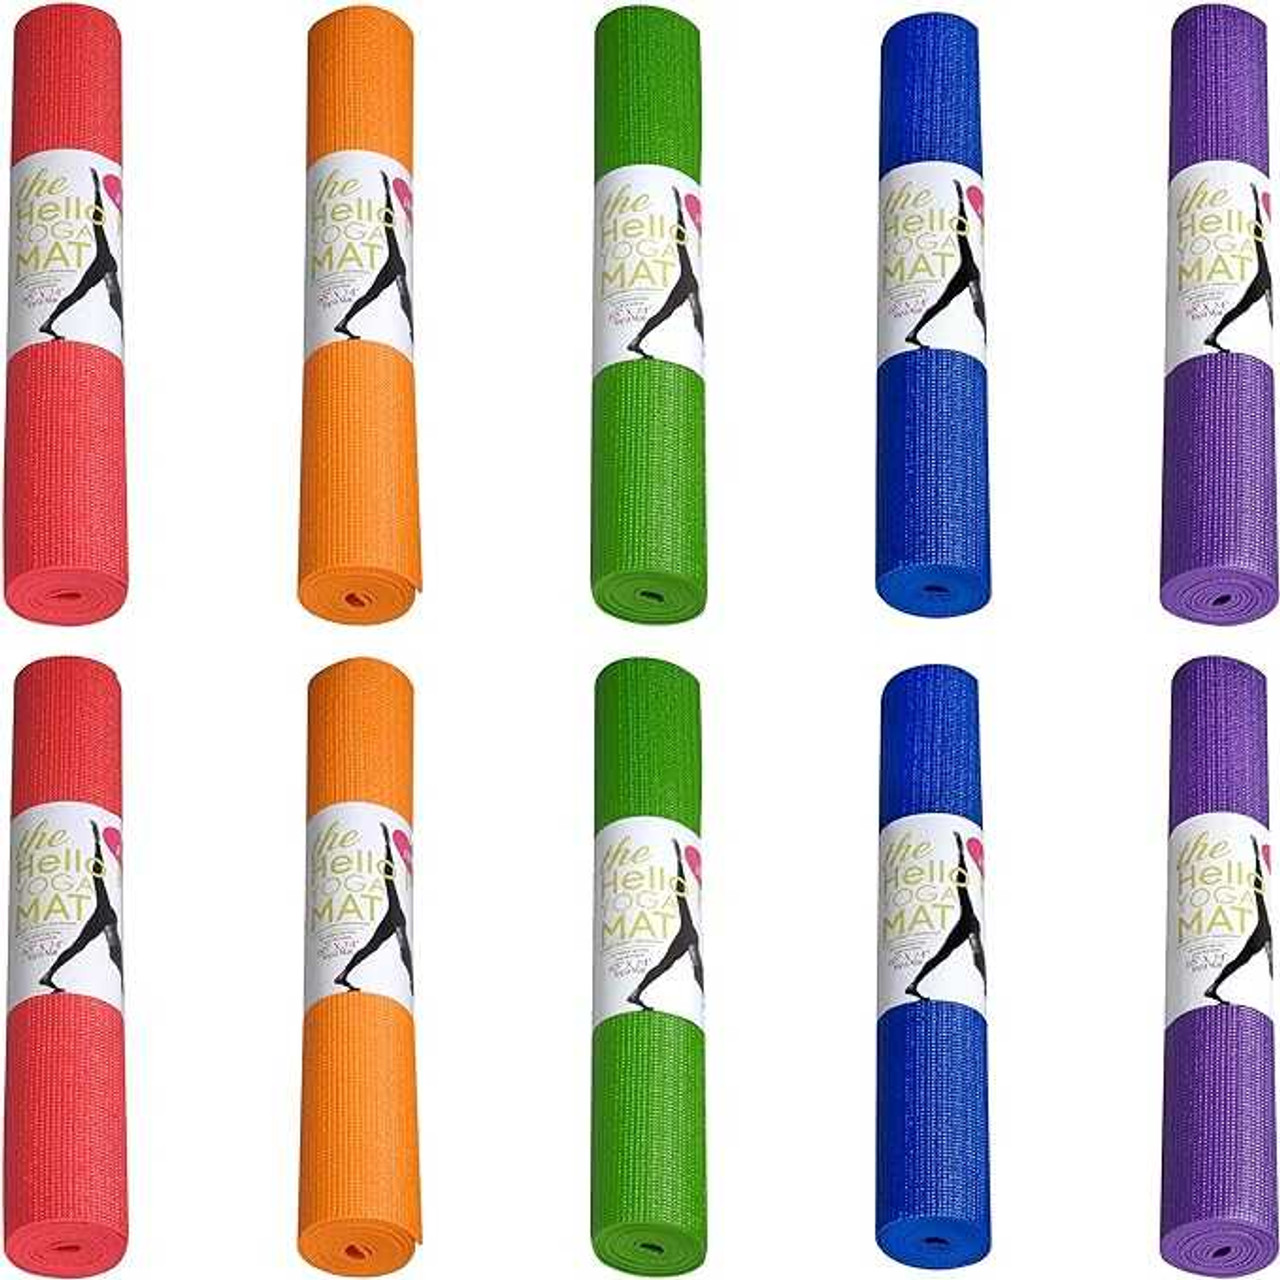 Hello Fit Products - Wholesale Yoga Mats